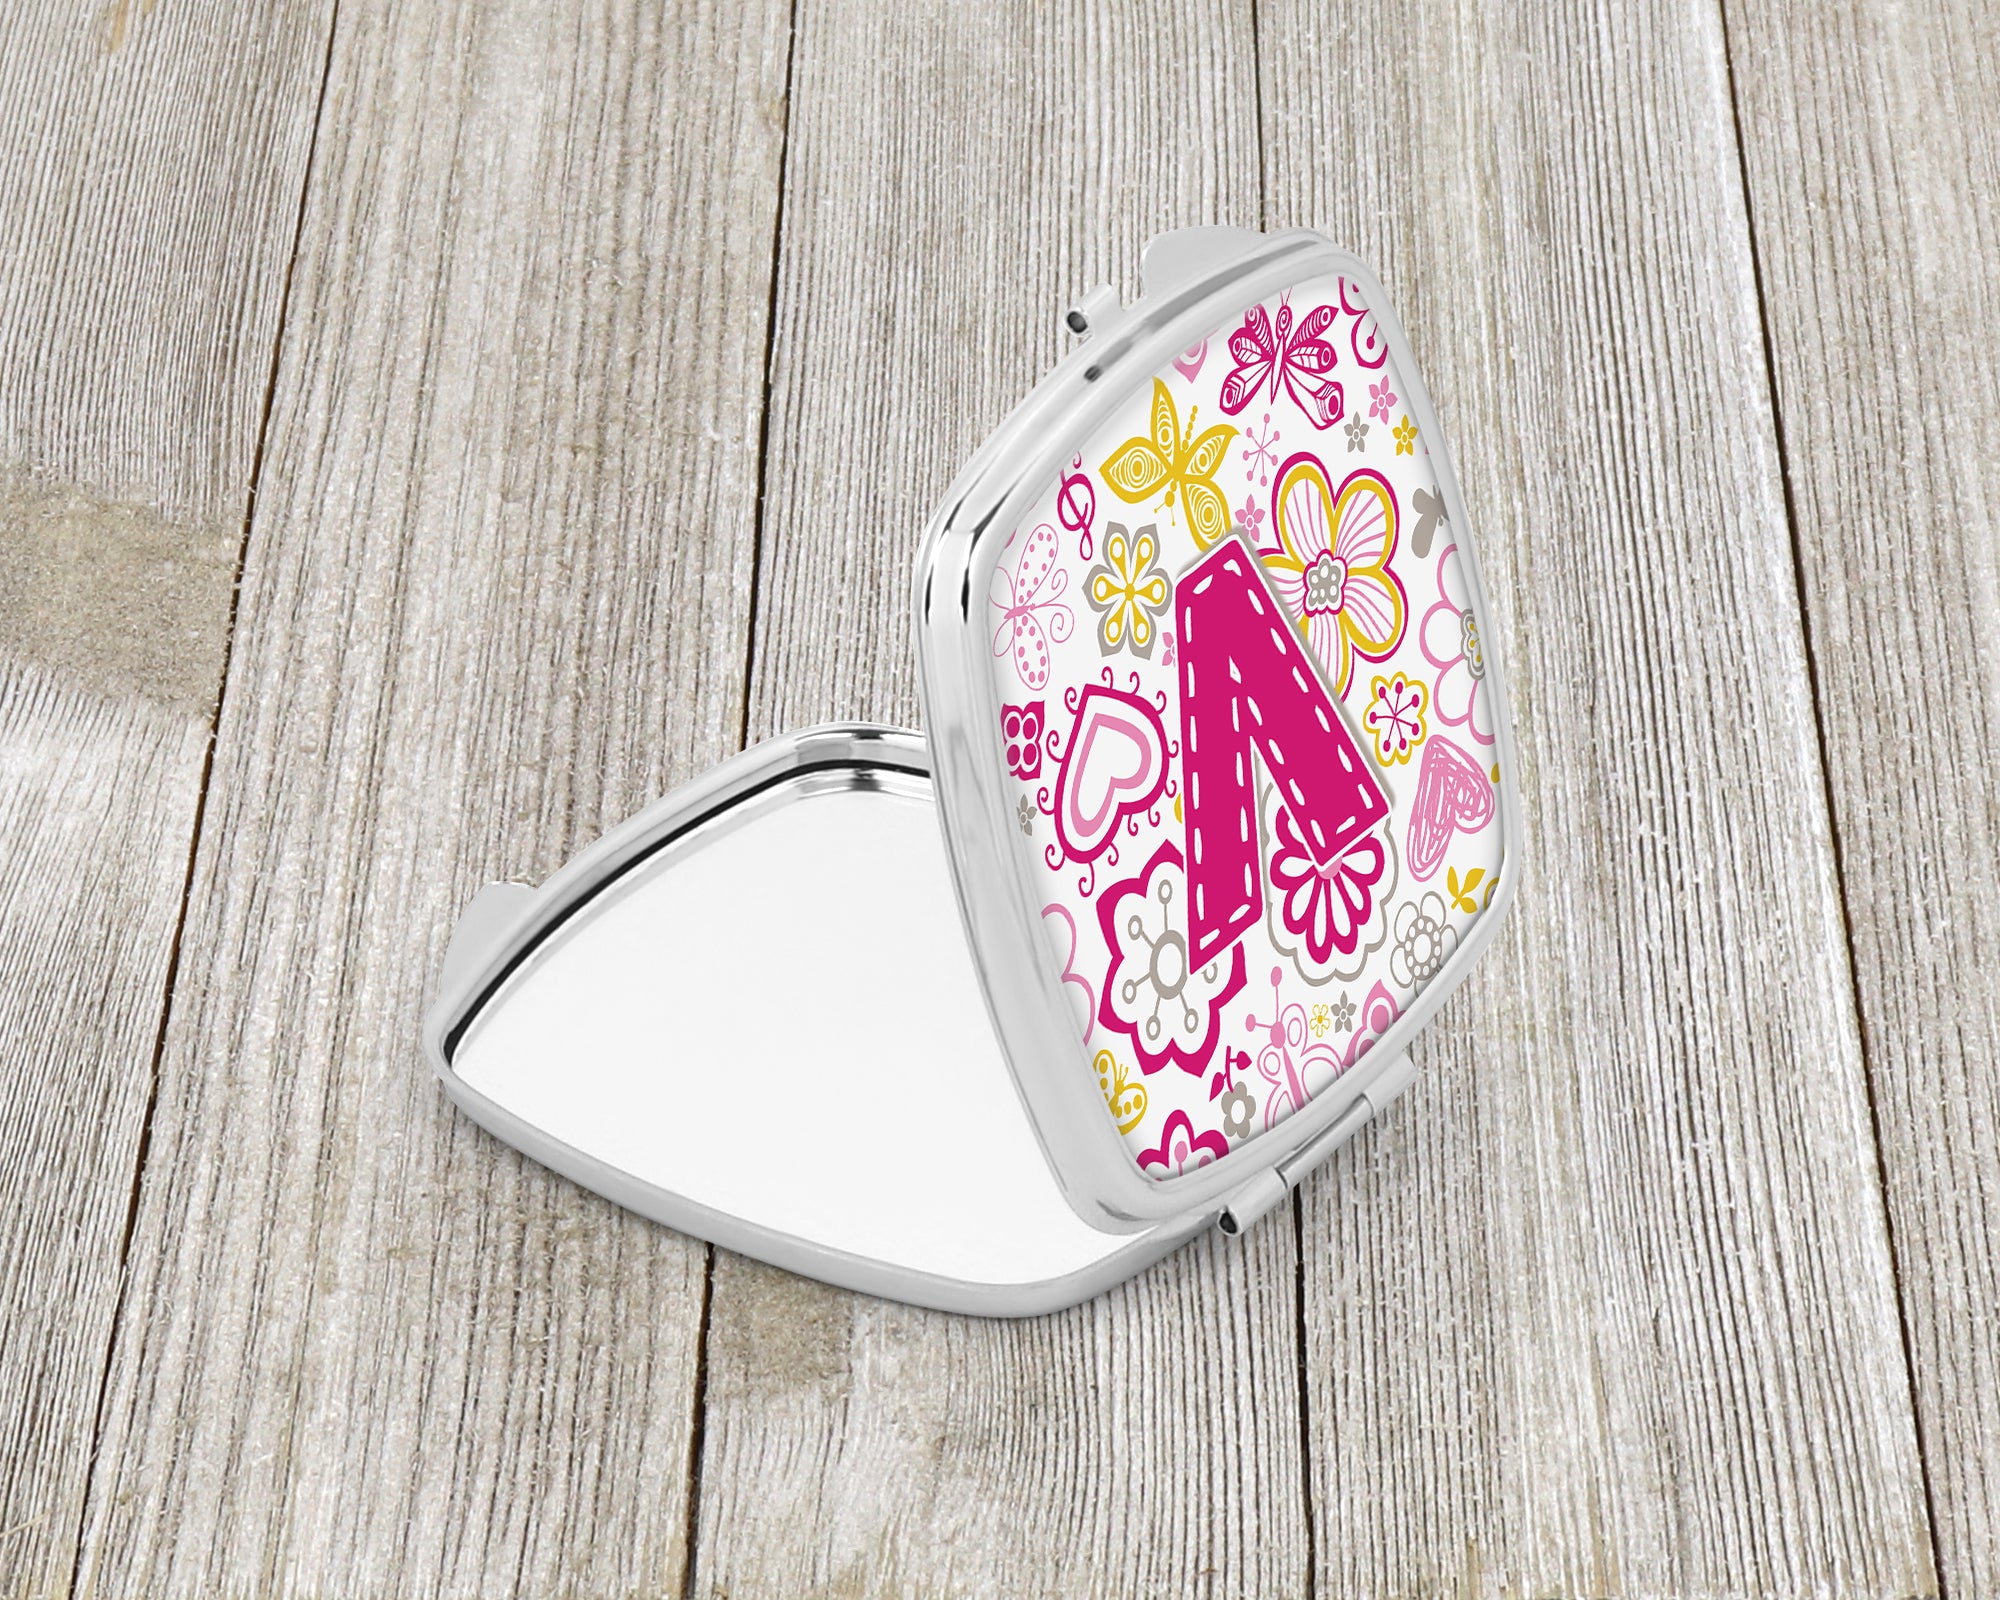 Letter V Flowers and Butterflies Pink Compact Mirror CJ2005-VSCM